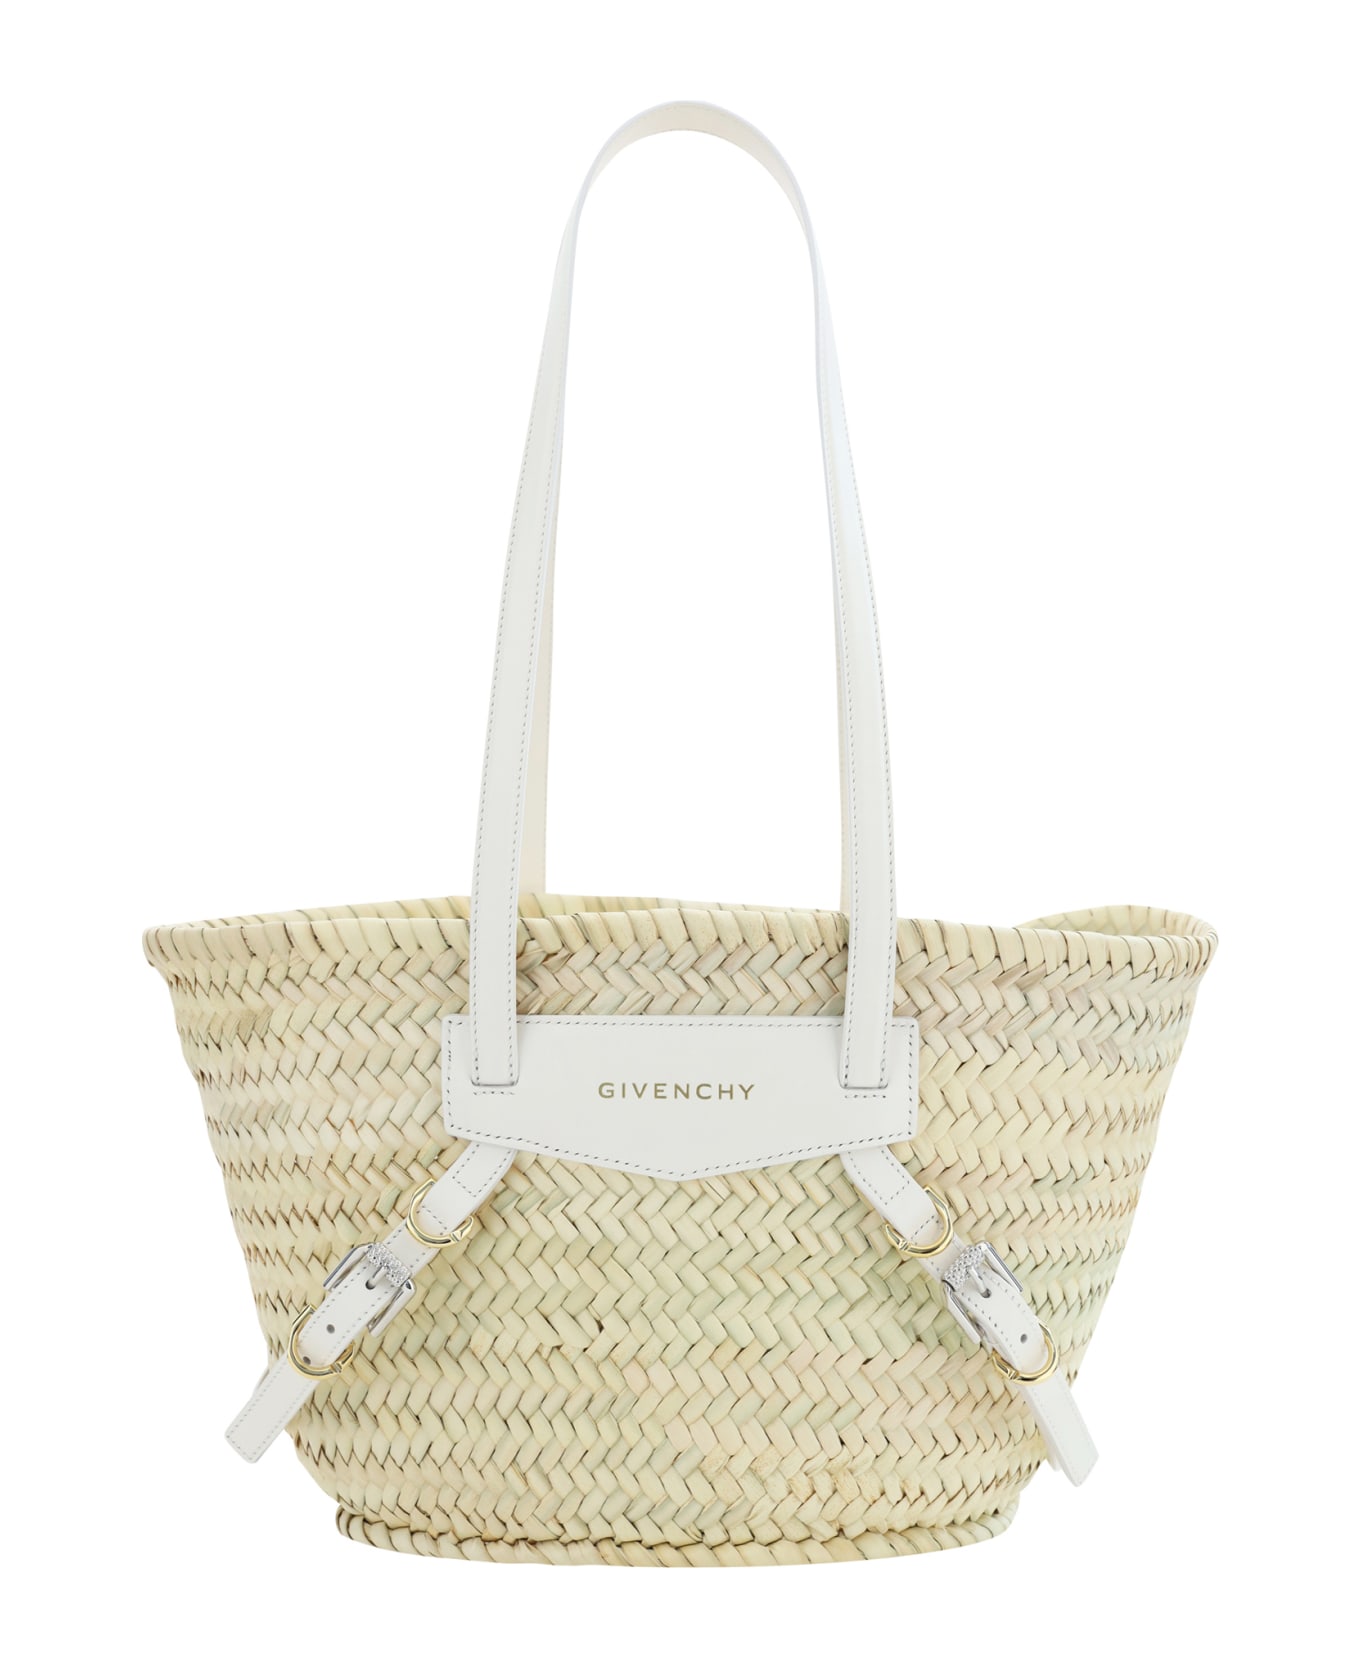 Givenchy White Voyou Basket Small Model In Raffia - Ivory